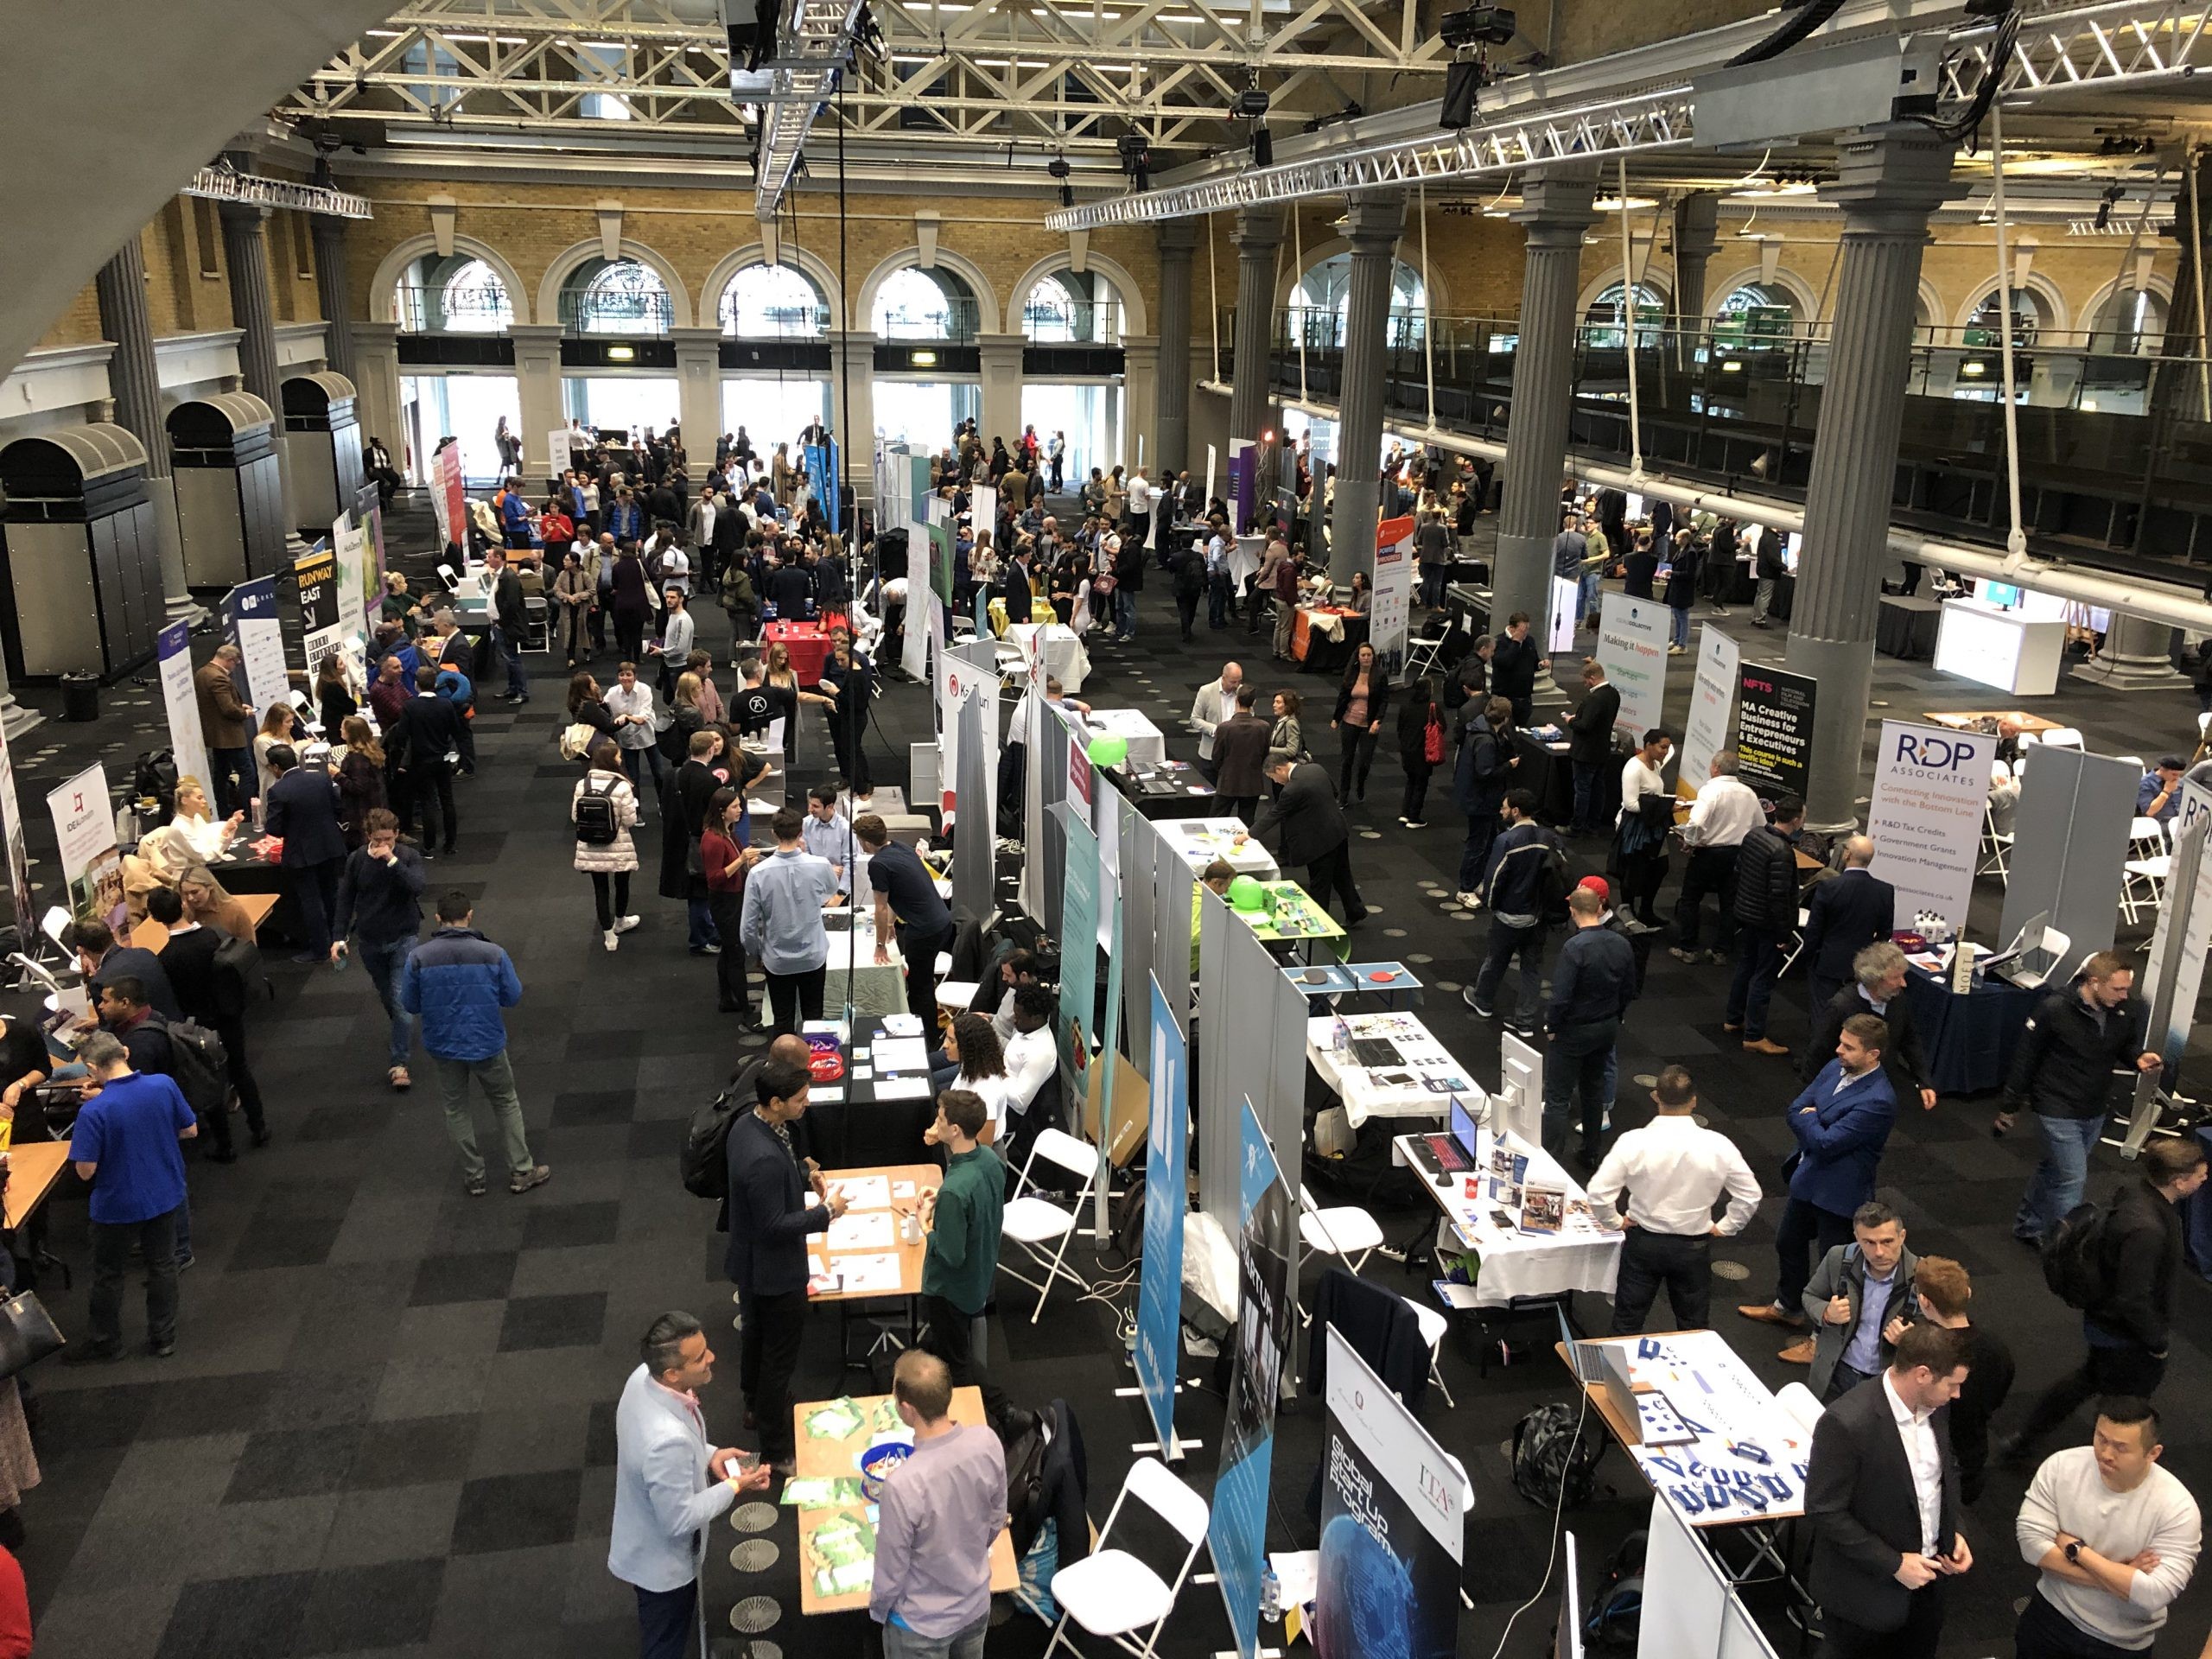 Birds eye view of 100s of stands in a conference hall at London tech